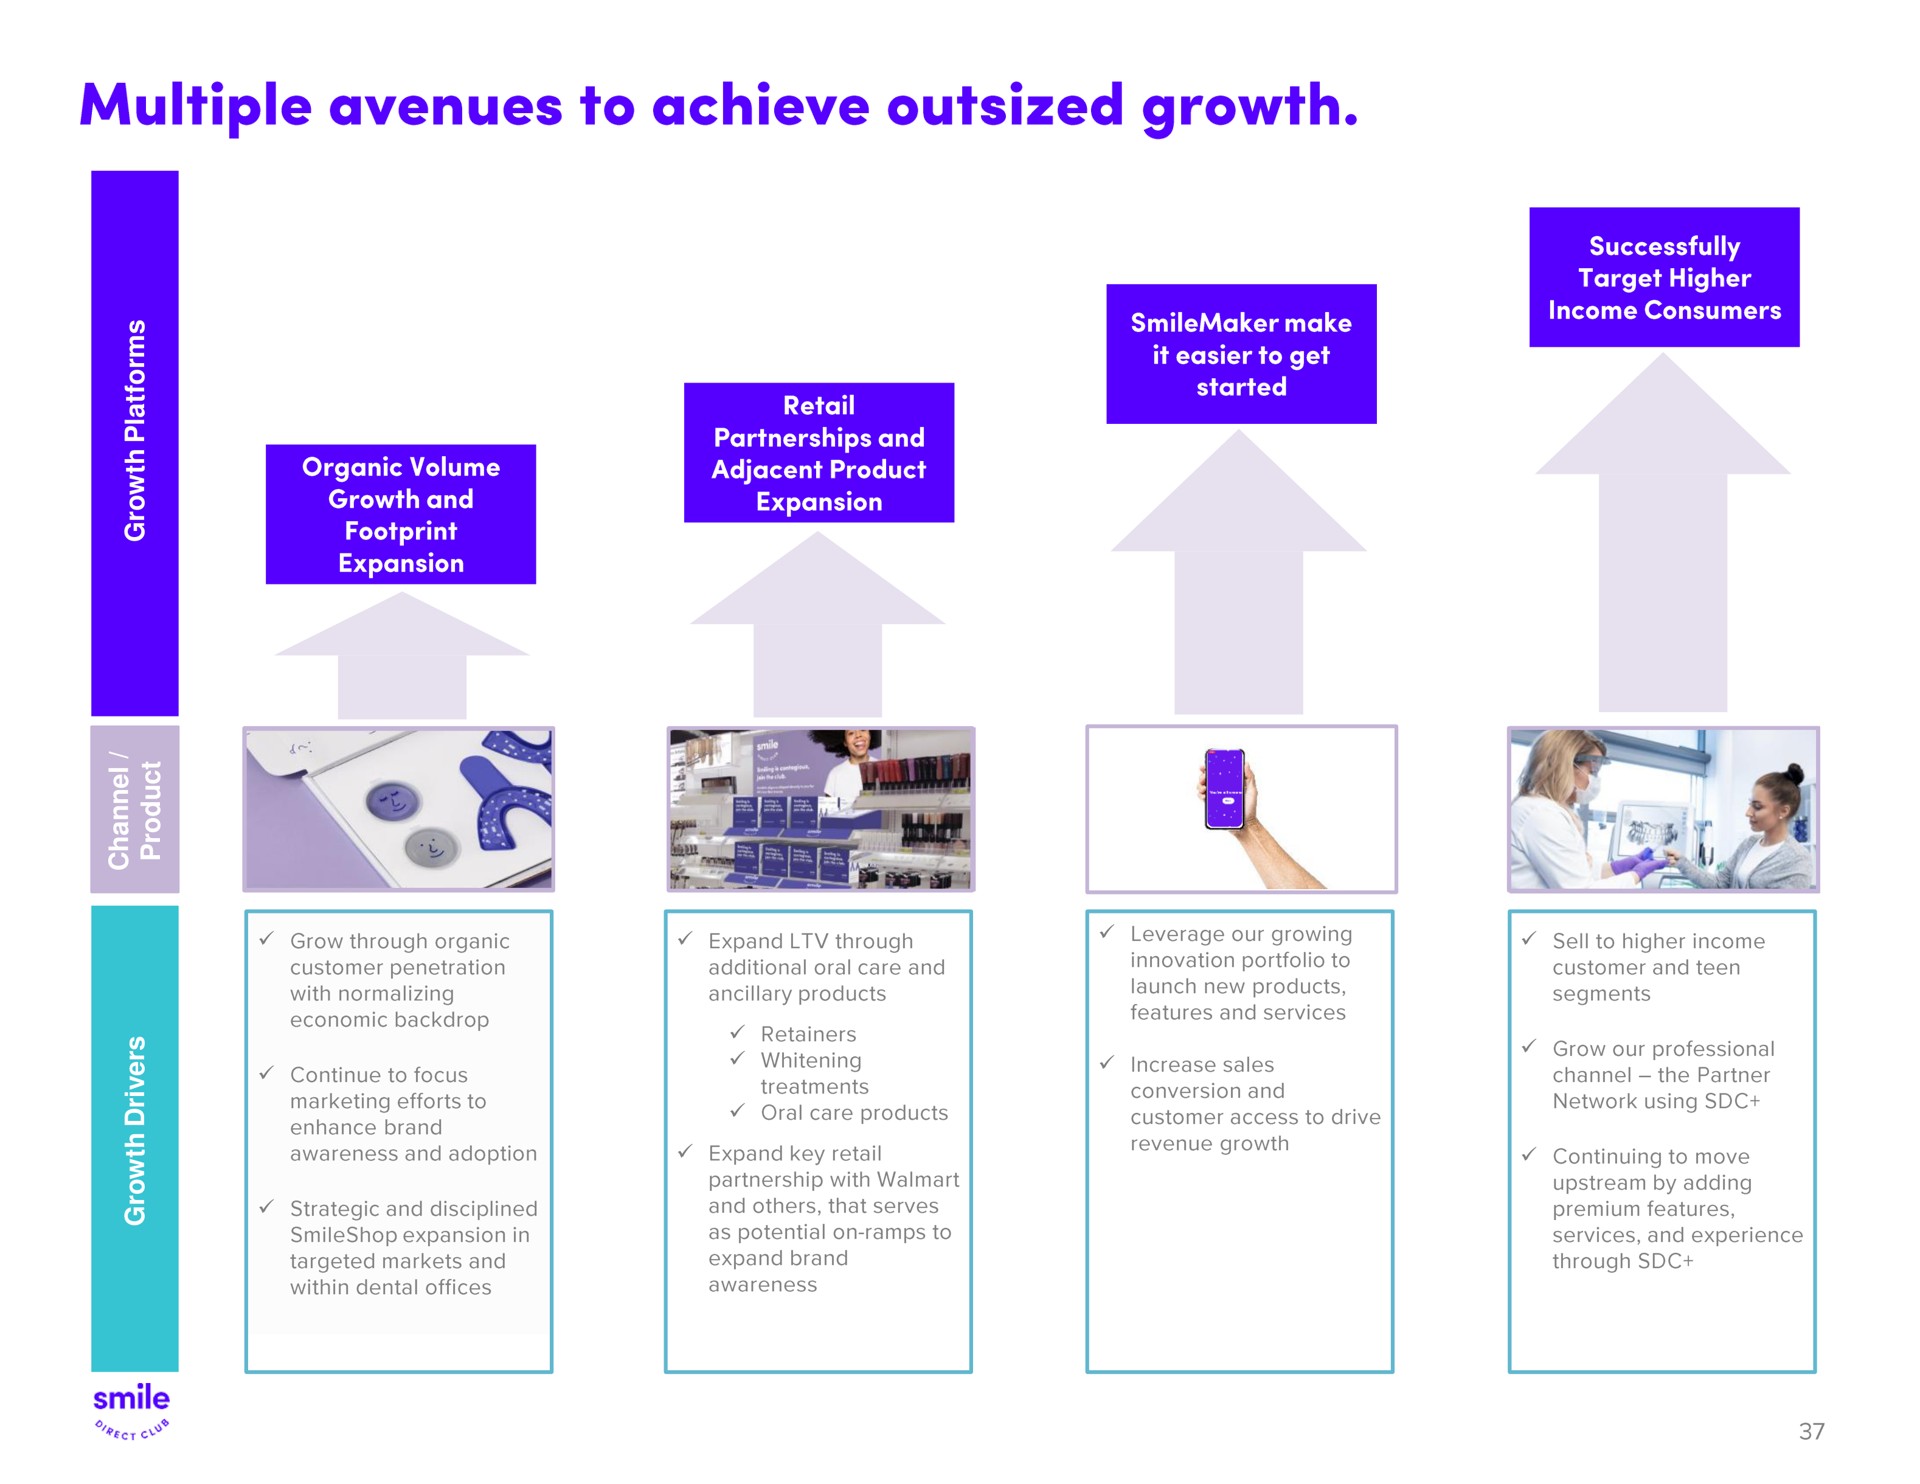 multiple avenues to achieve outsized growth | SmileDirectClub